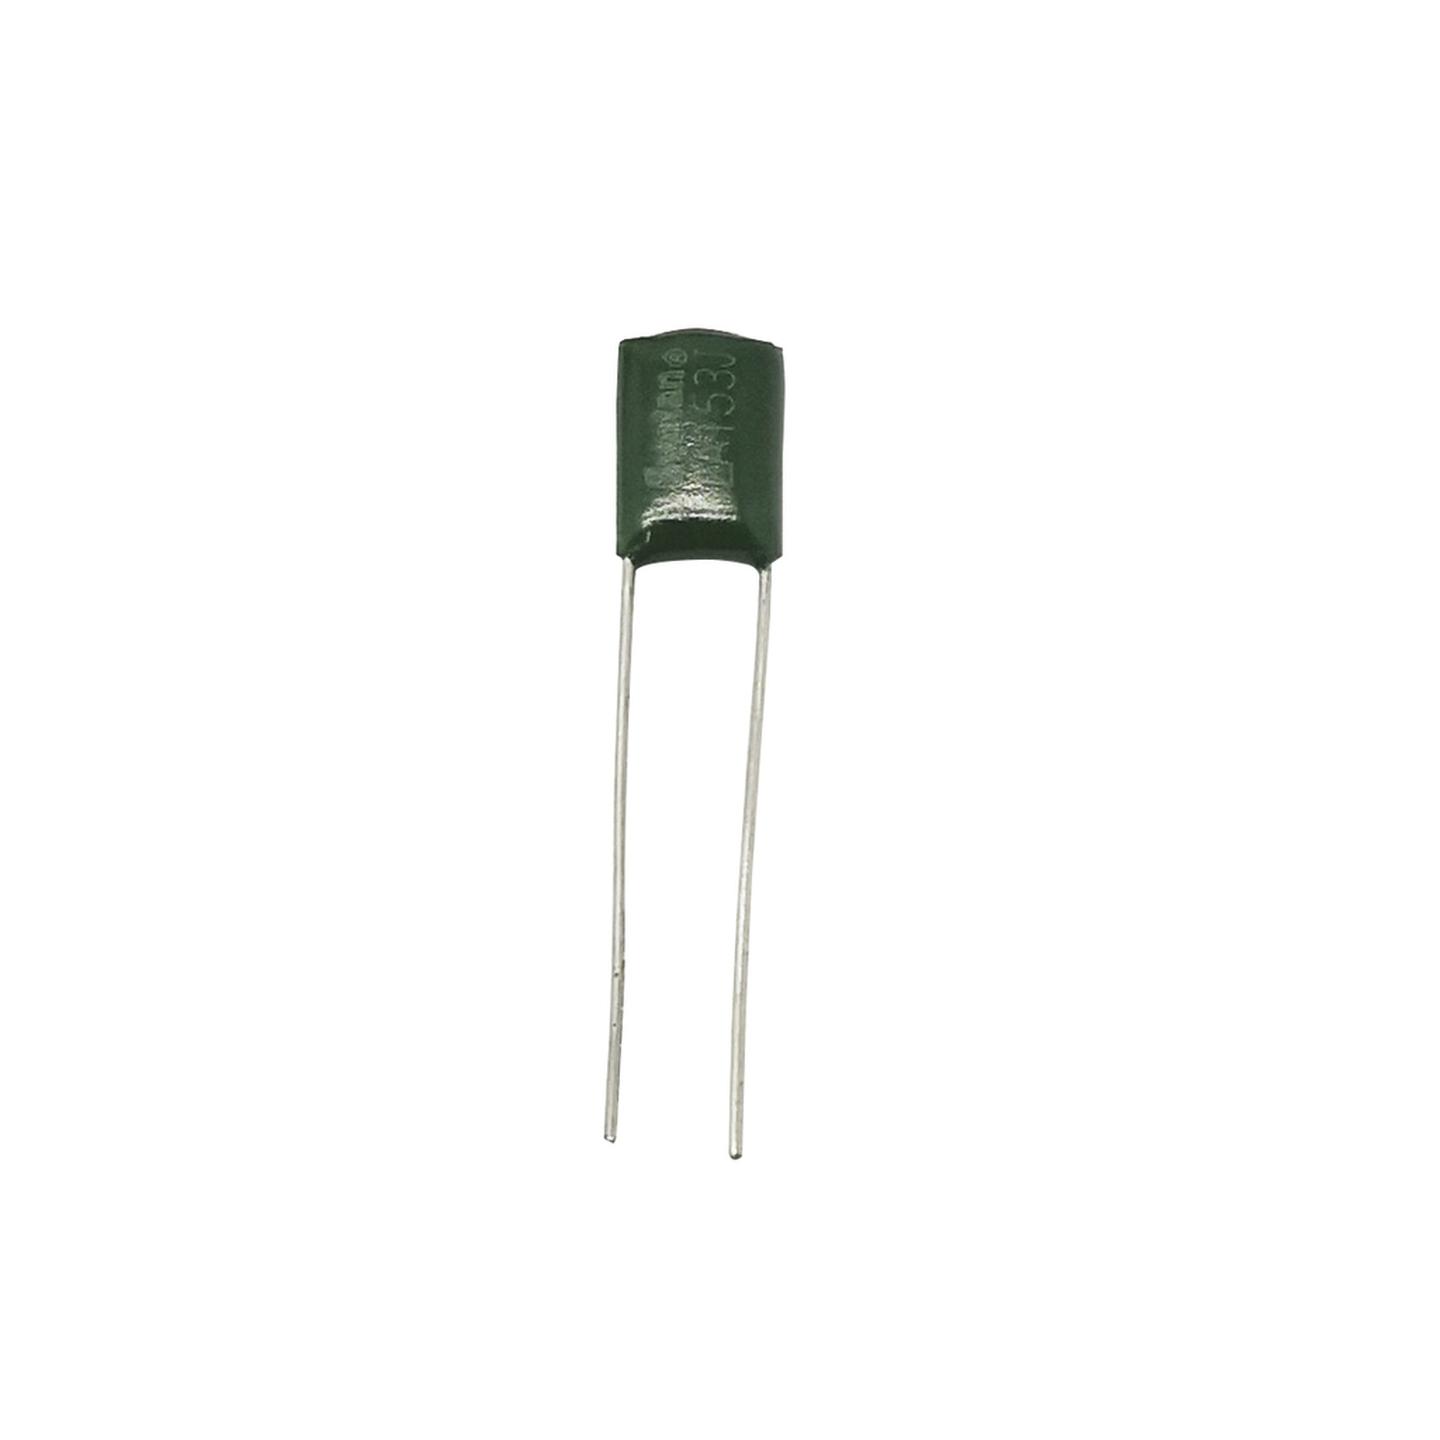 15nF 100VDC Polyester Capacitor